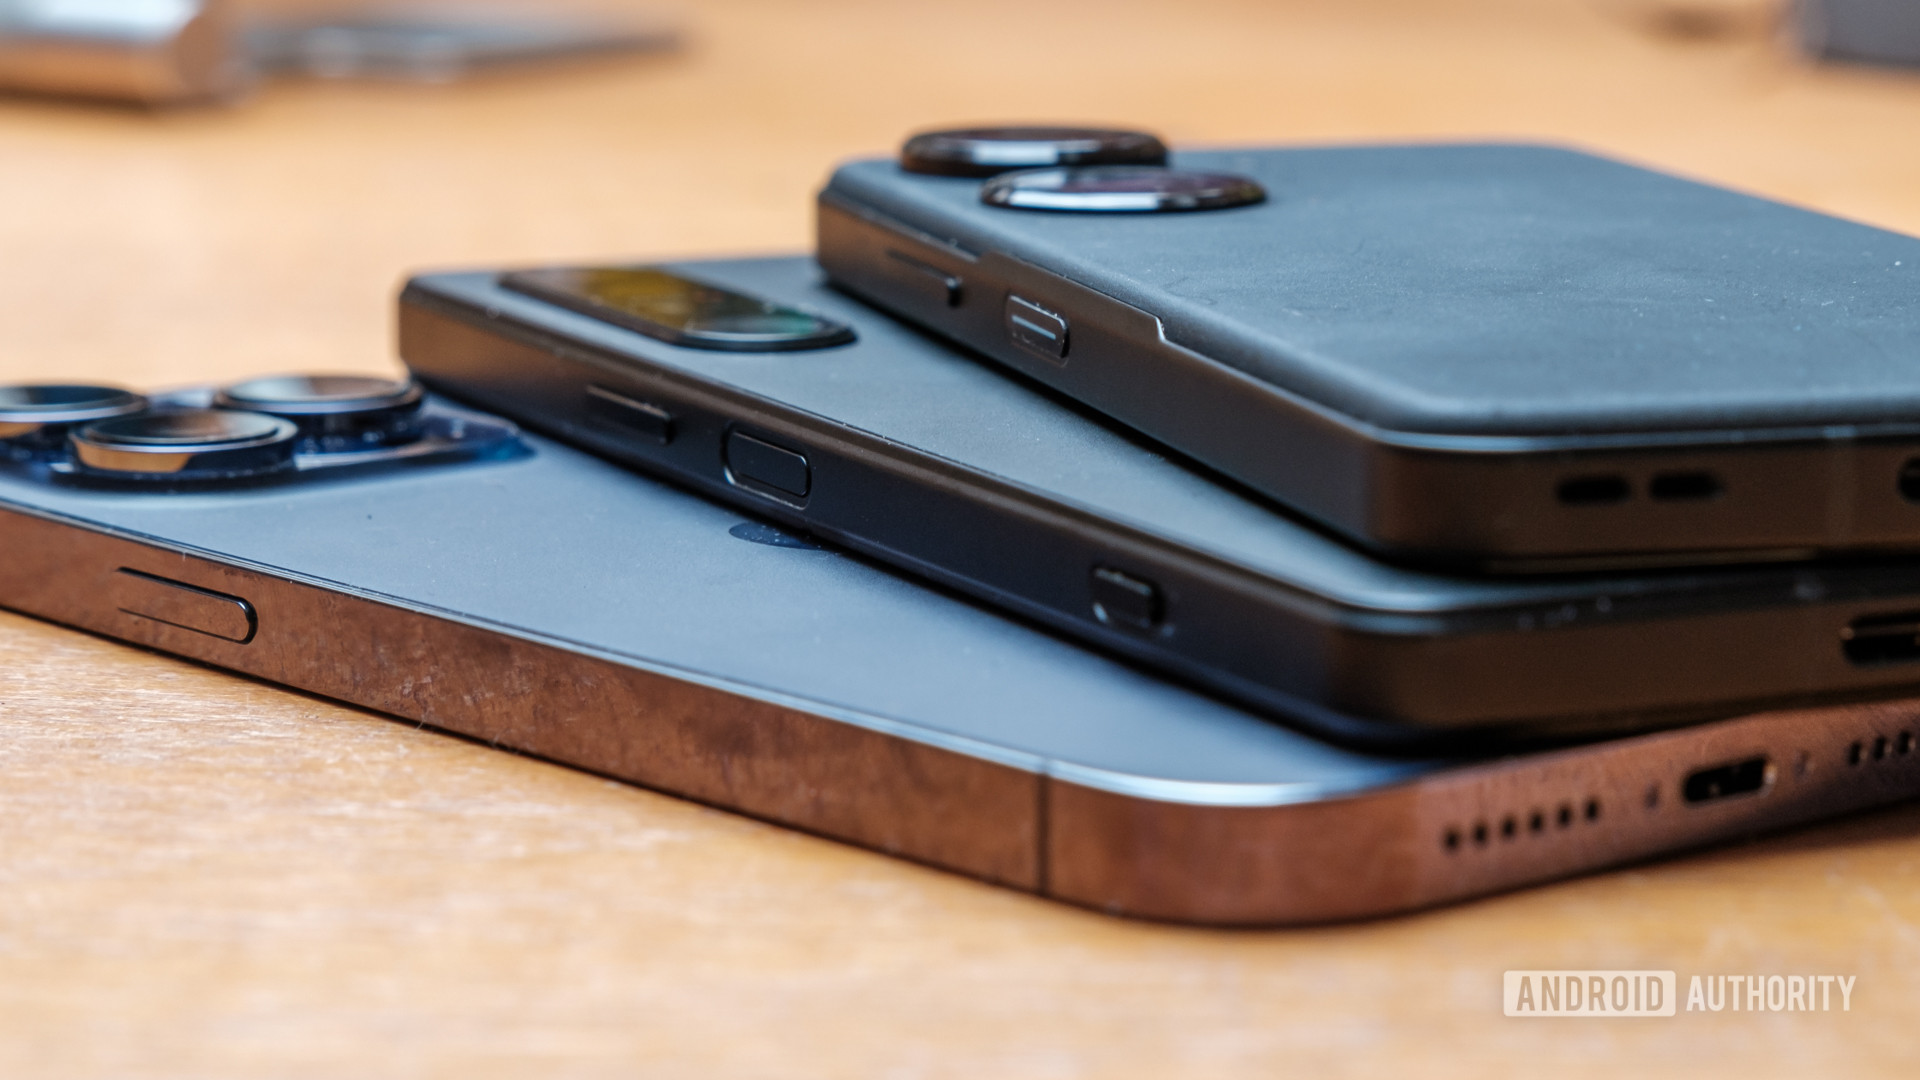 Smartphones with straight edges